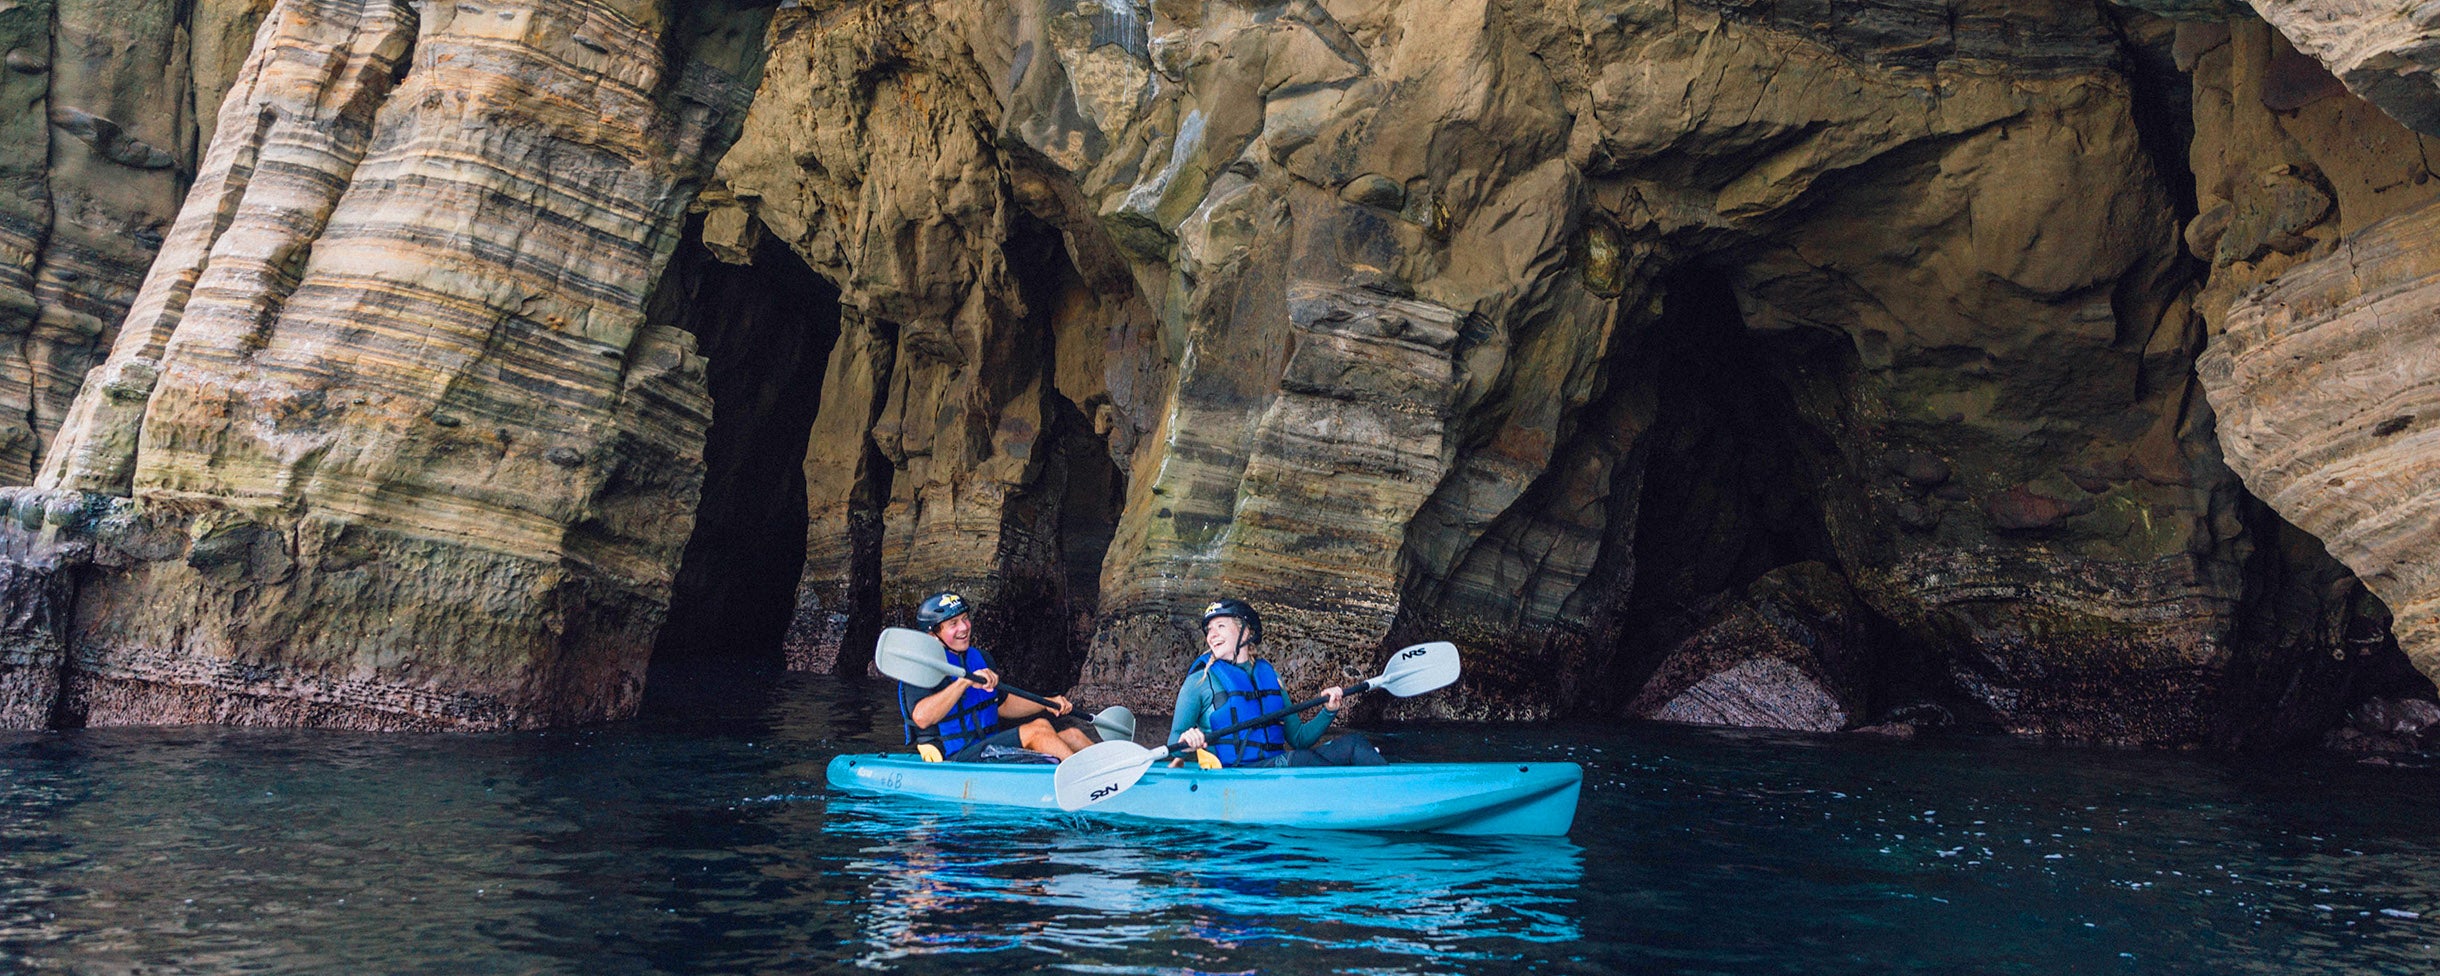 Everyday California Kayak Rentals laughing and having a good time at the La Jolla Ecological Reserve